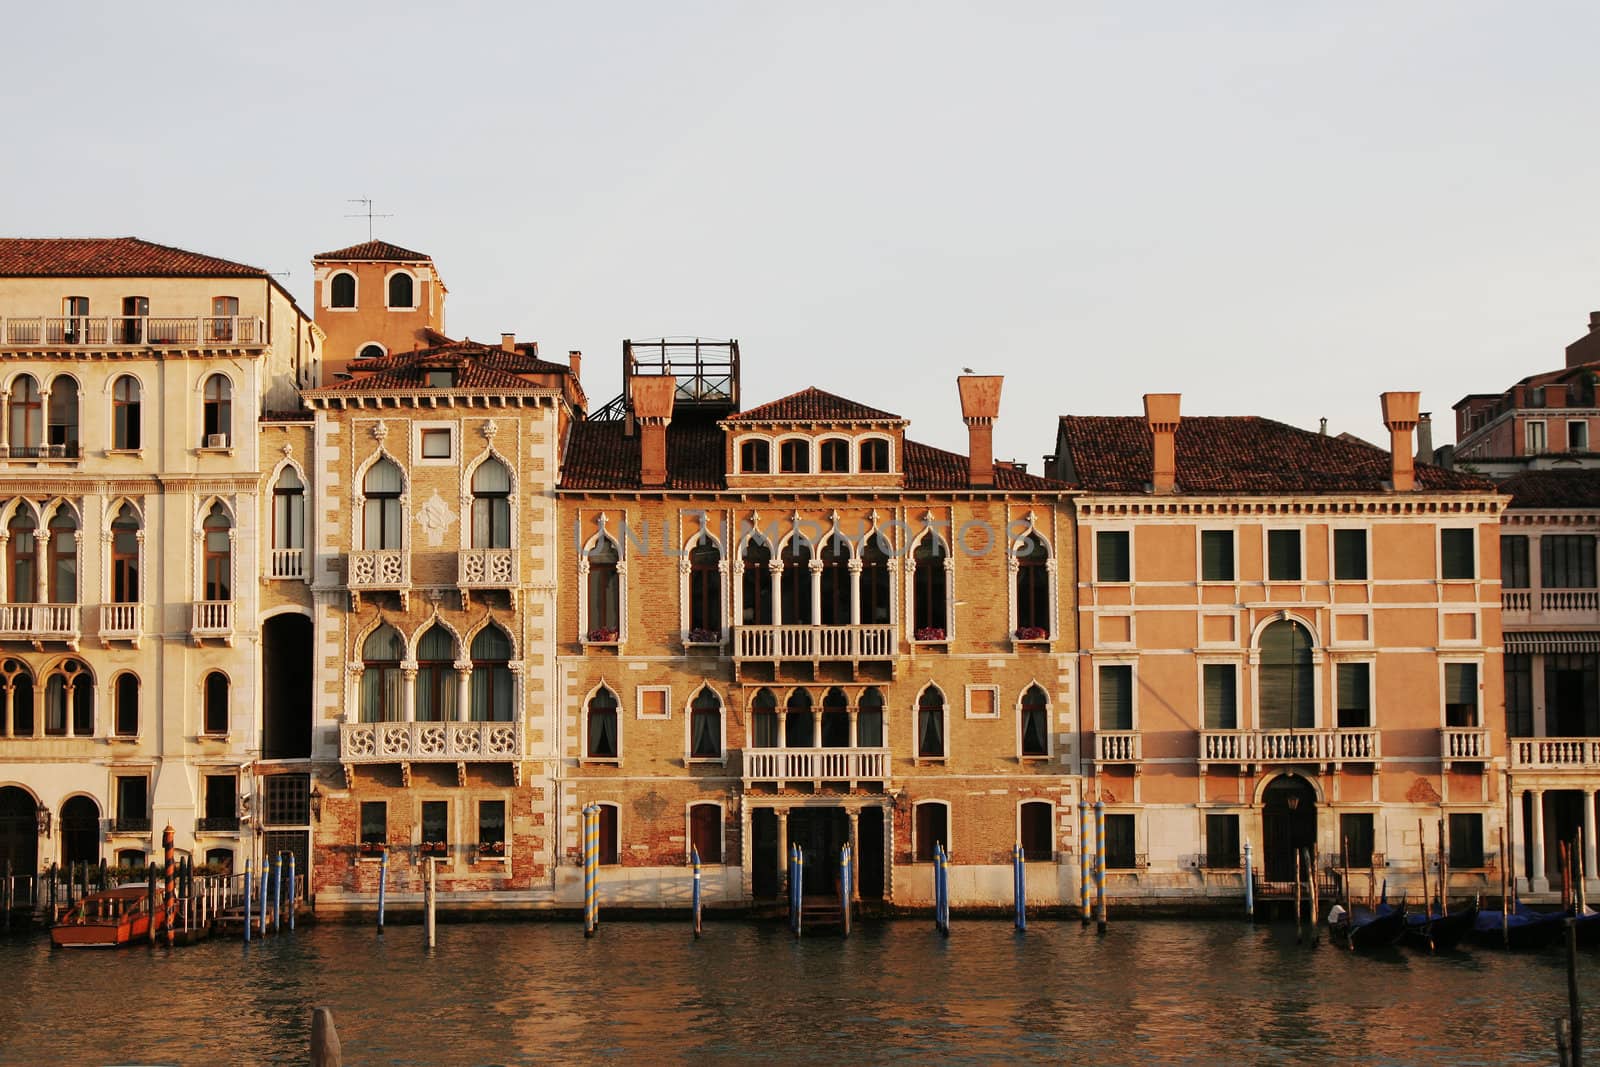 Venice, Italy - Typical Old Building Water Front Facade And Canal